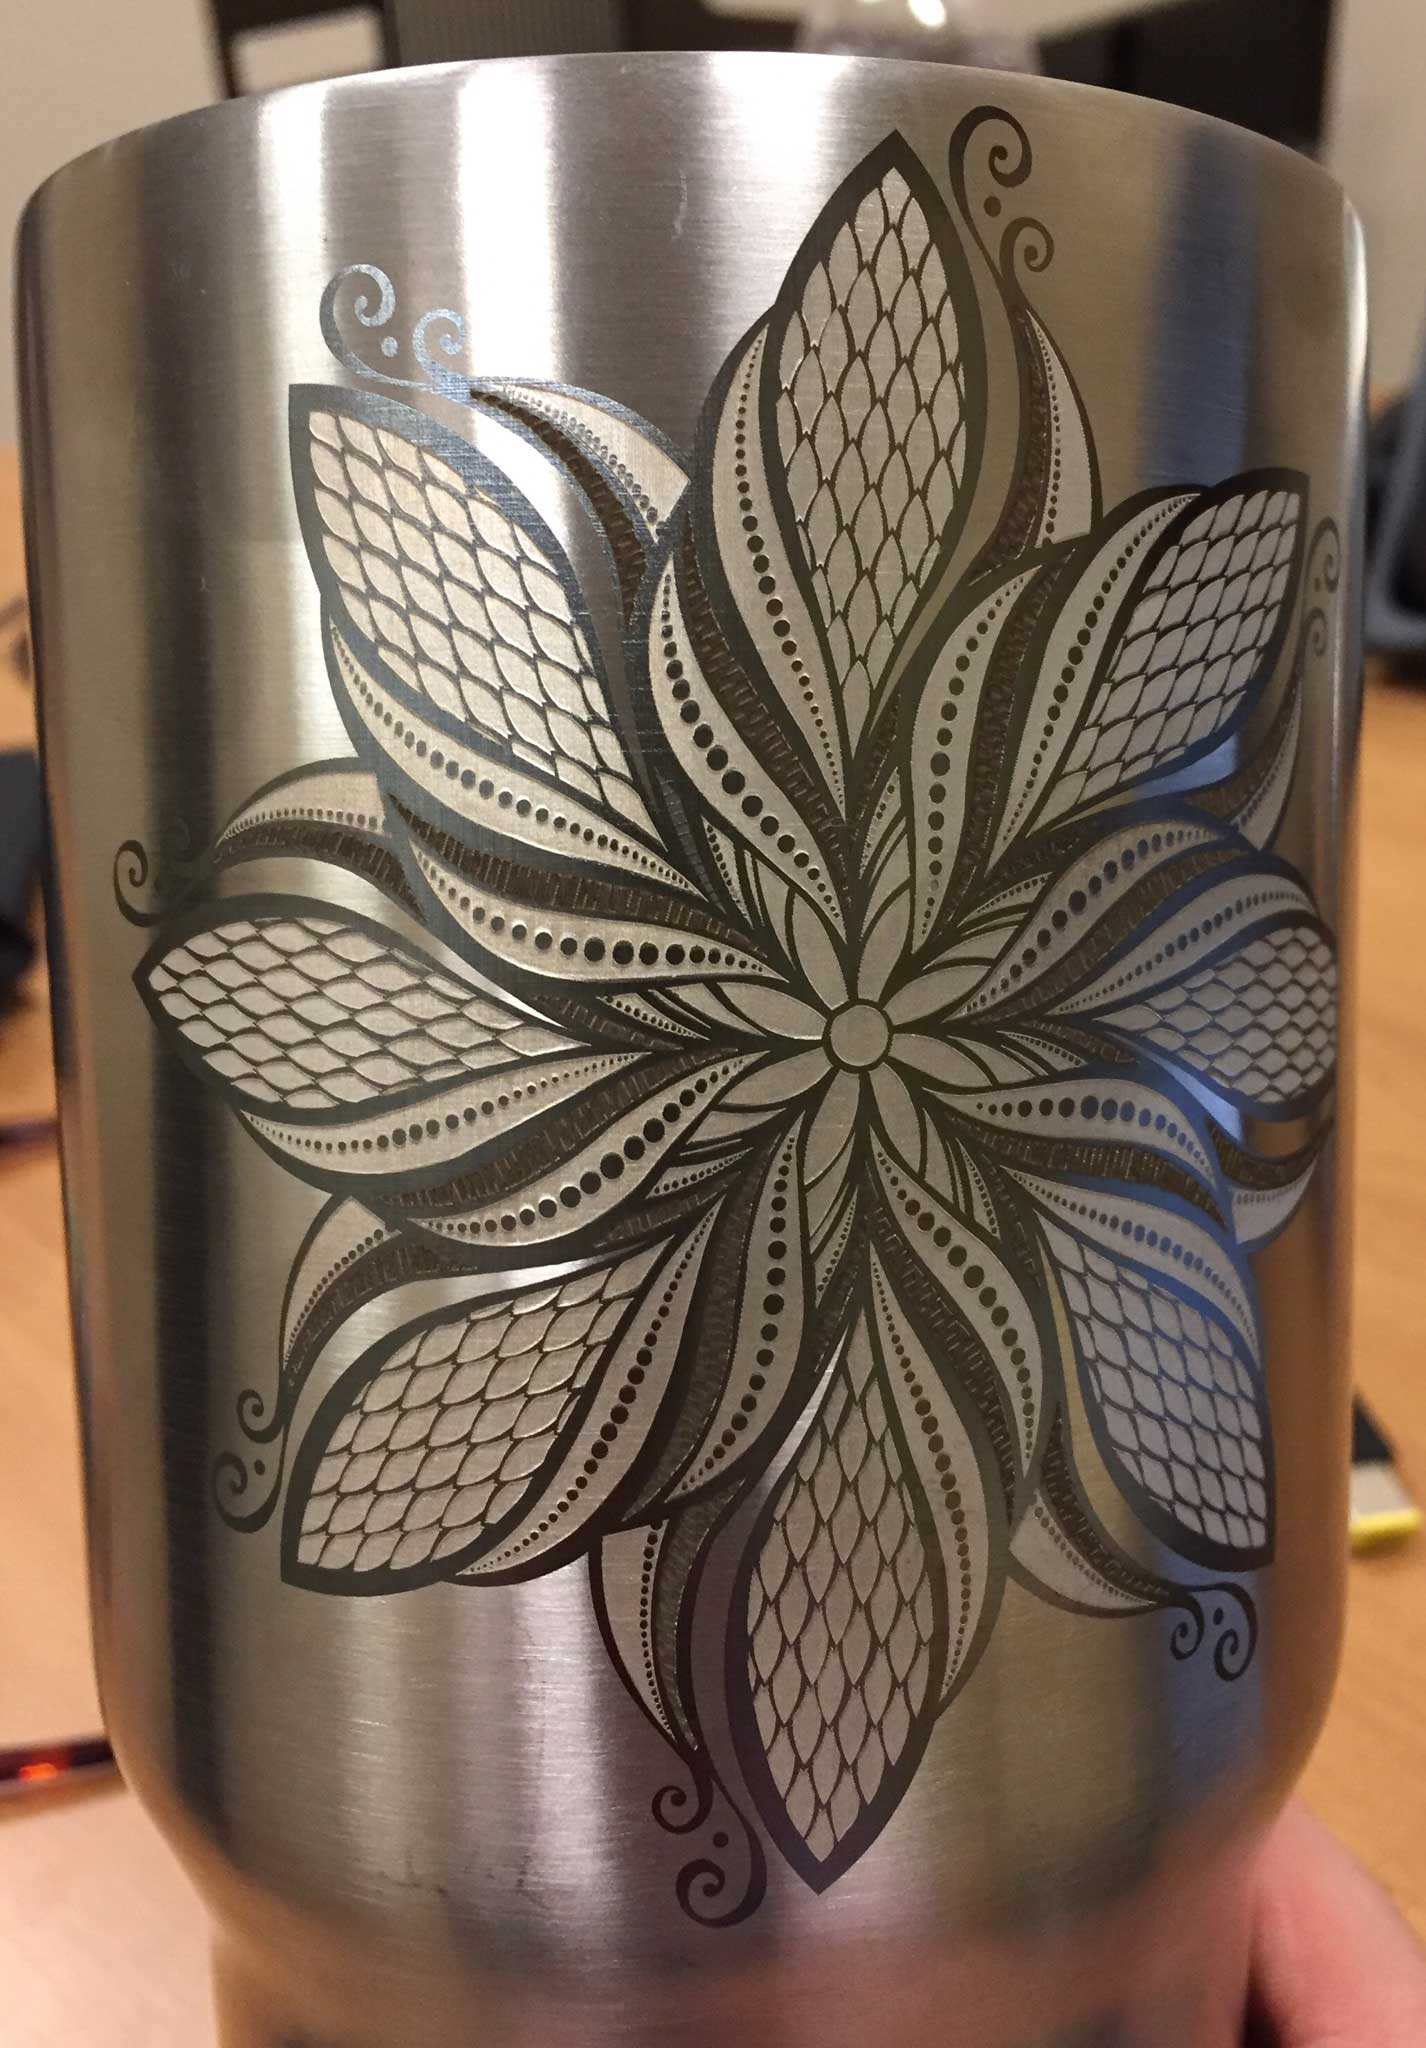 Laser Engraving on Stainless Steel Yeti Cup